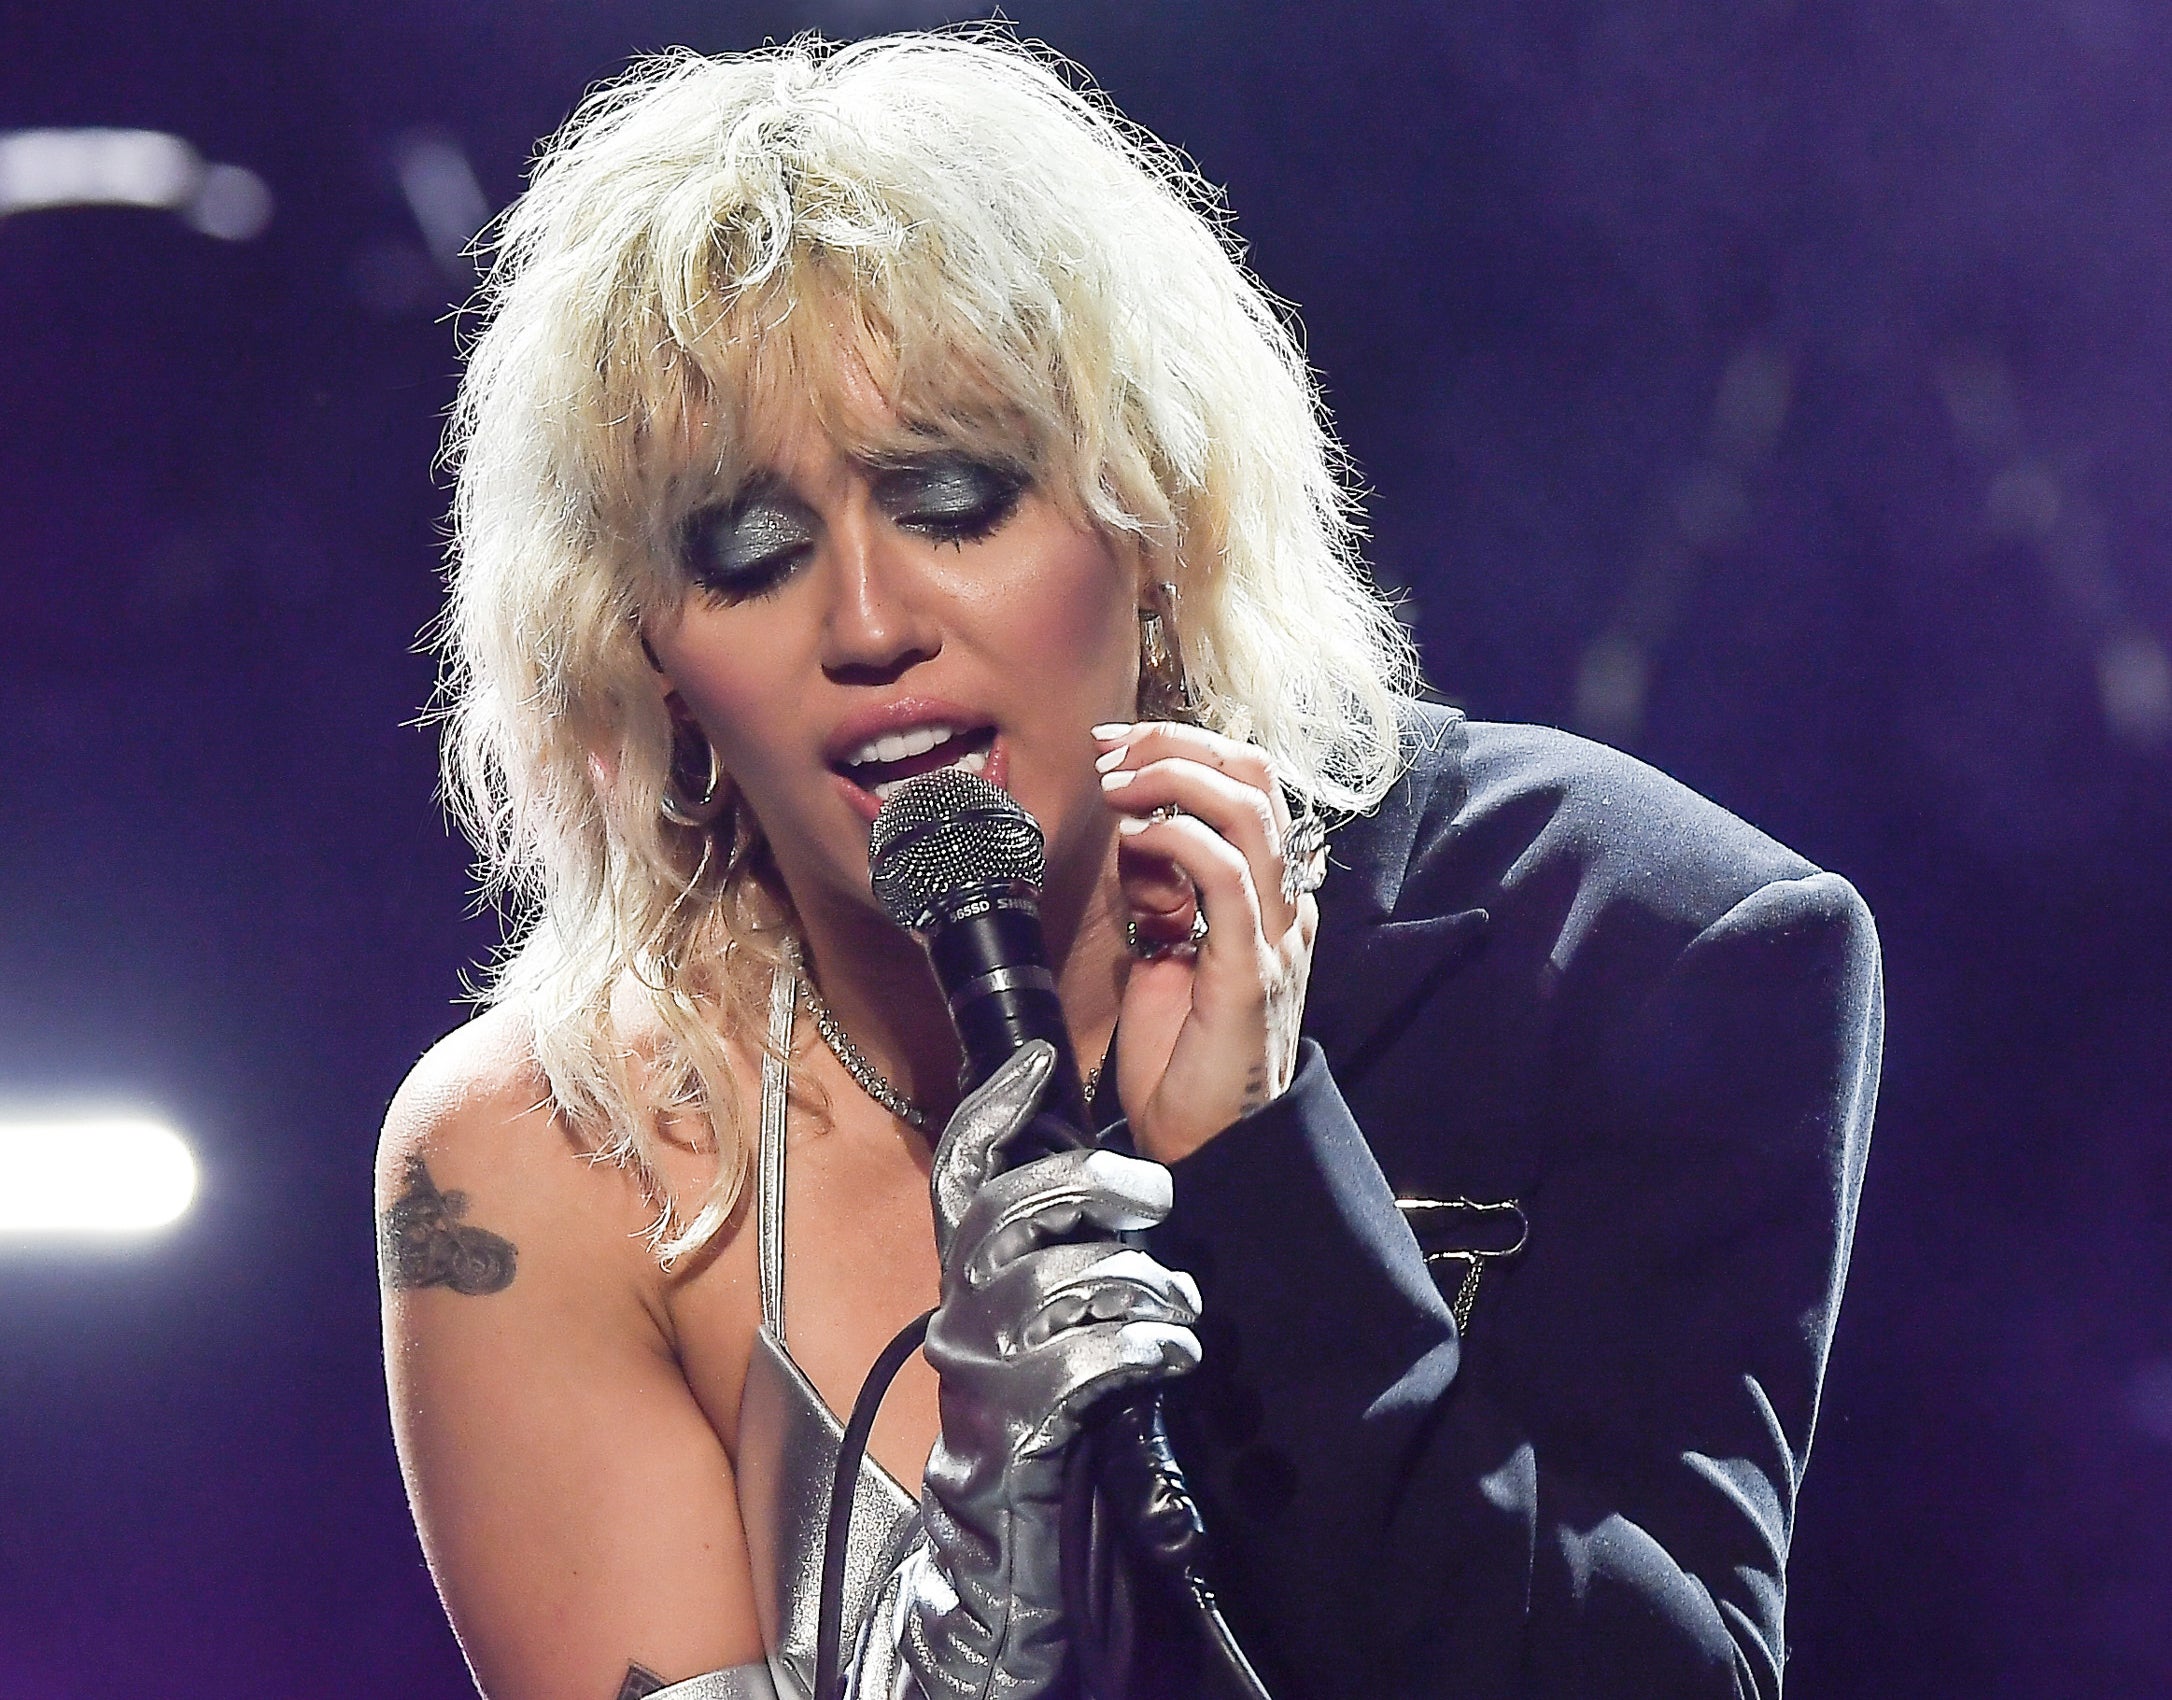 Miley performs at the festival wearing a silver bikini top and a cropped blazer